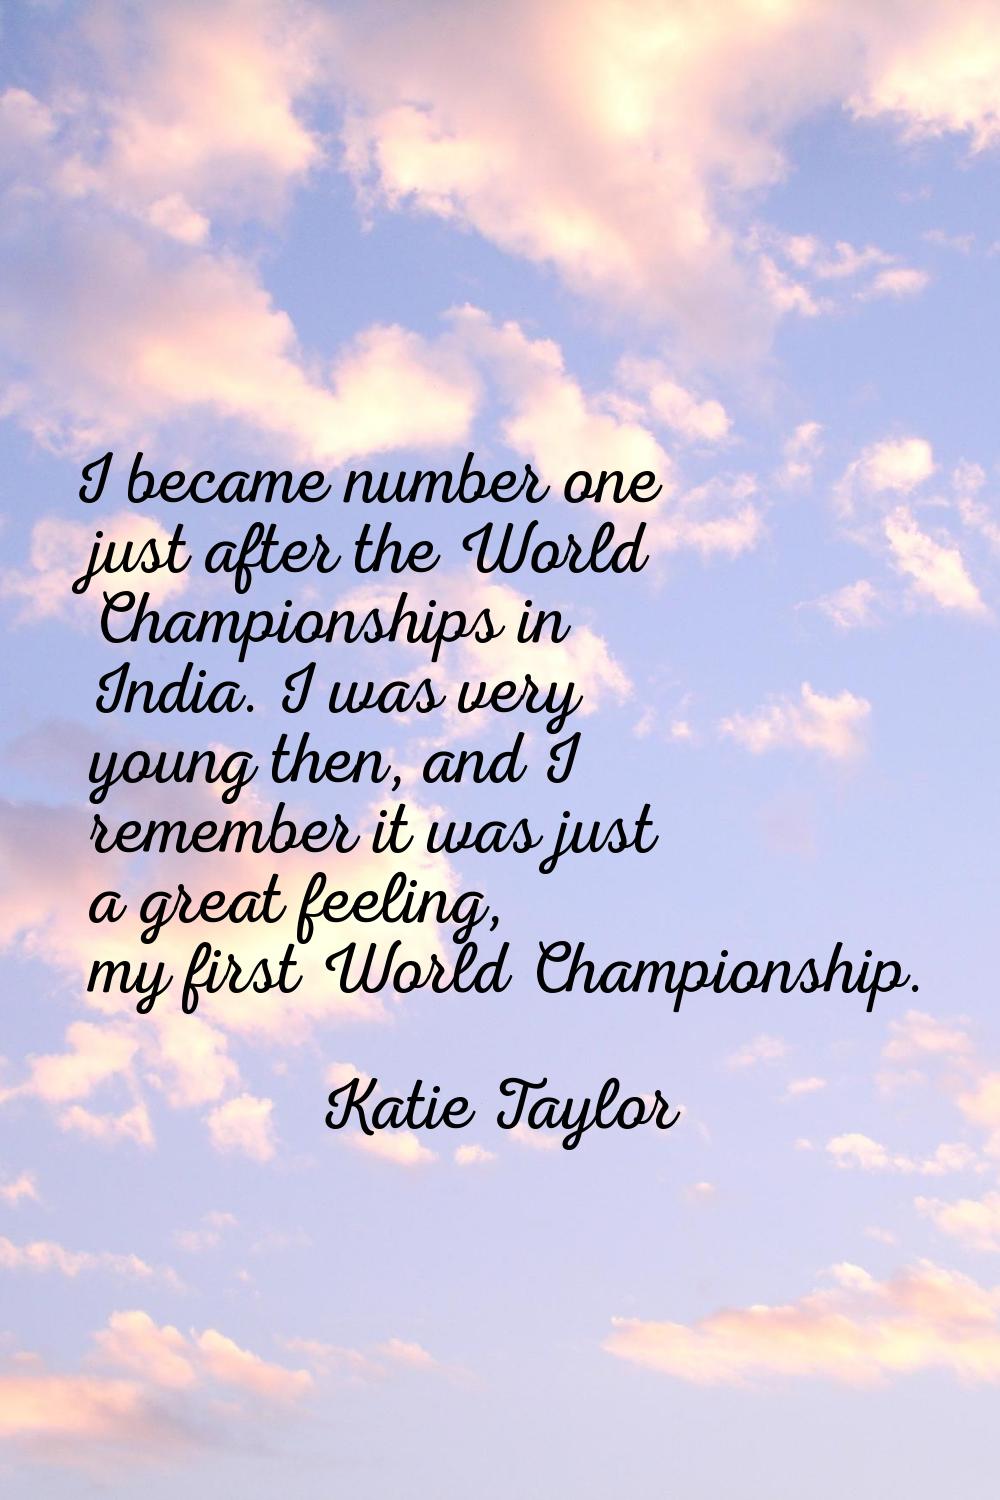 I became number one just after the World Championships in India. I was very young then, and I remem